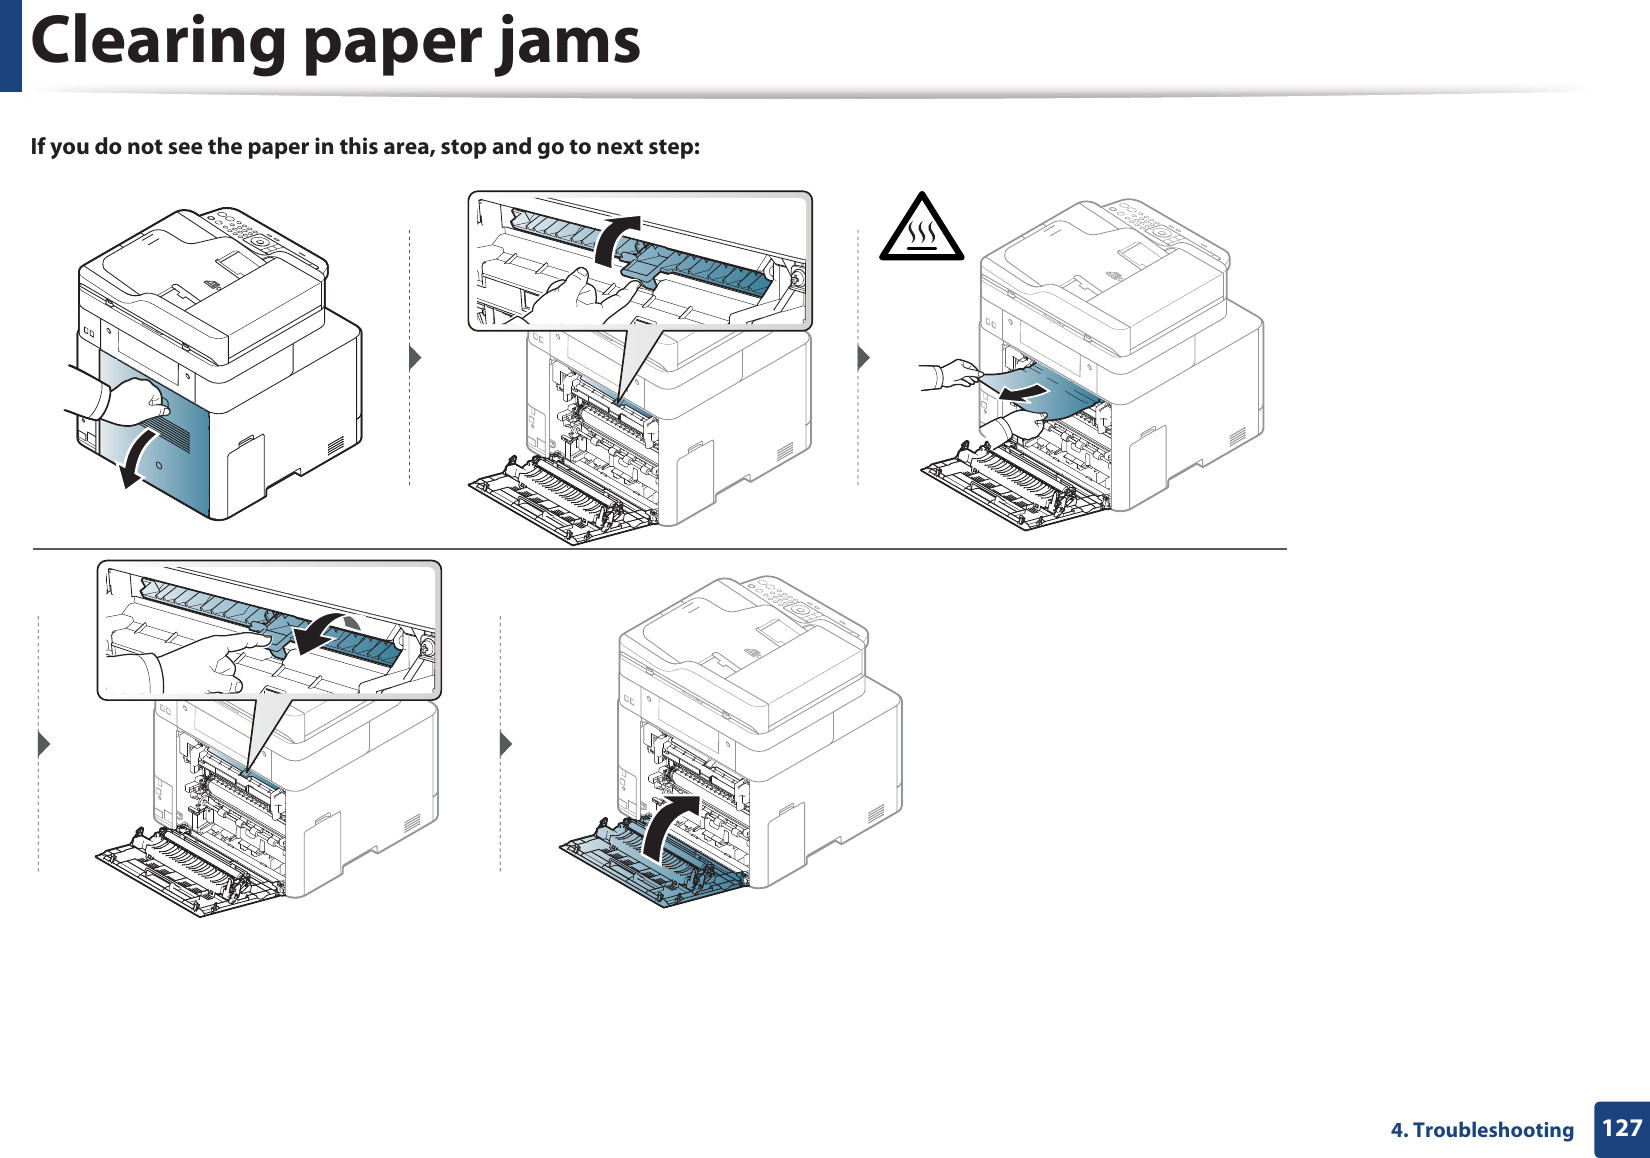 Clearing paper jams1274. TroubleshootingIf you do not see the paper in this area, stop and go to next step: